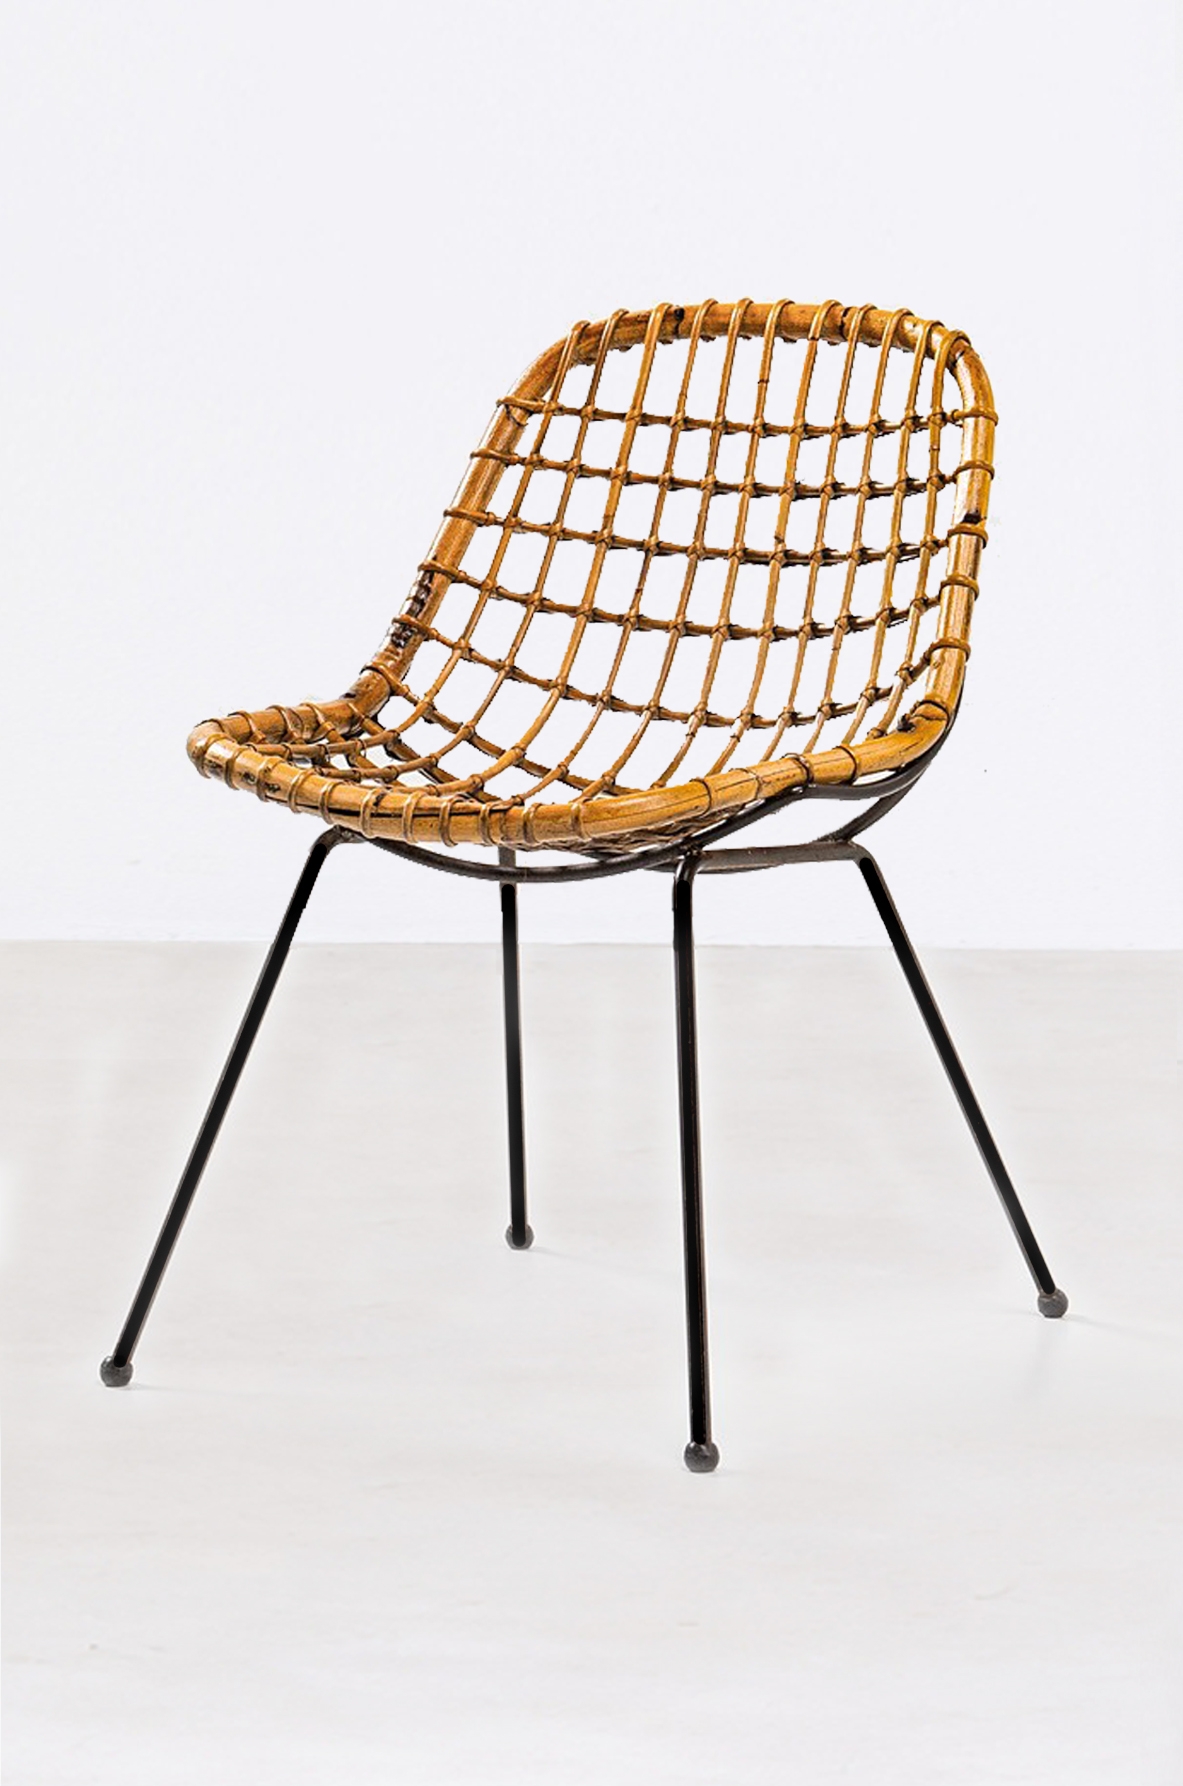 Gian Franco Leger. Set of 8 curved rattan chairs with iron rod structure, 1960's